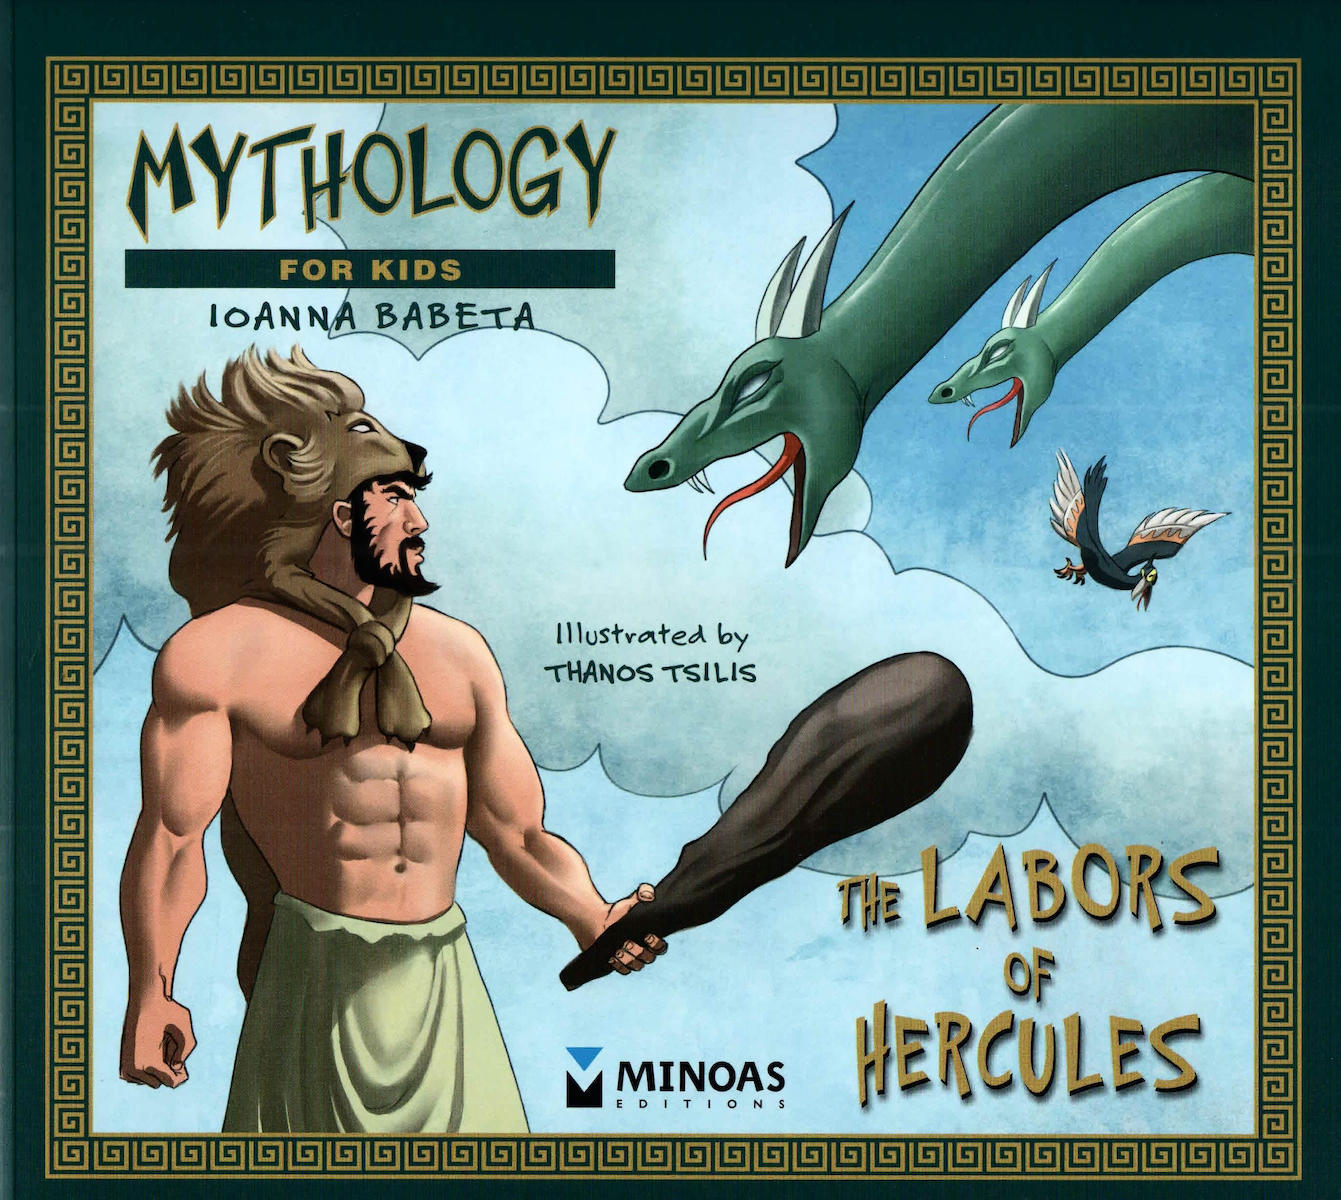 labours of hercules